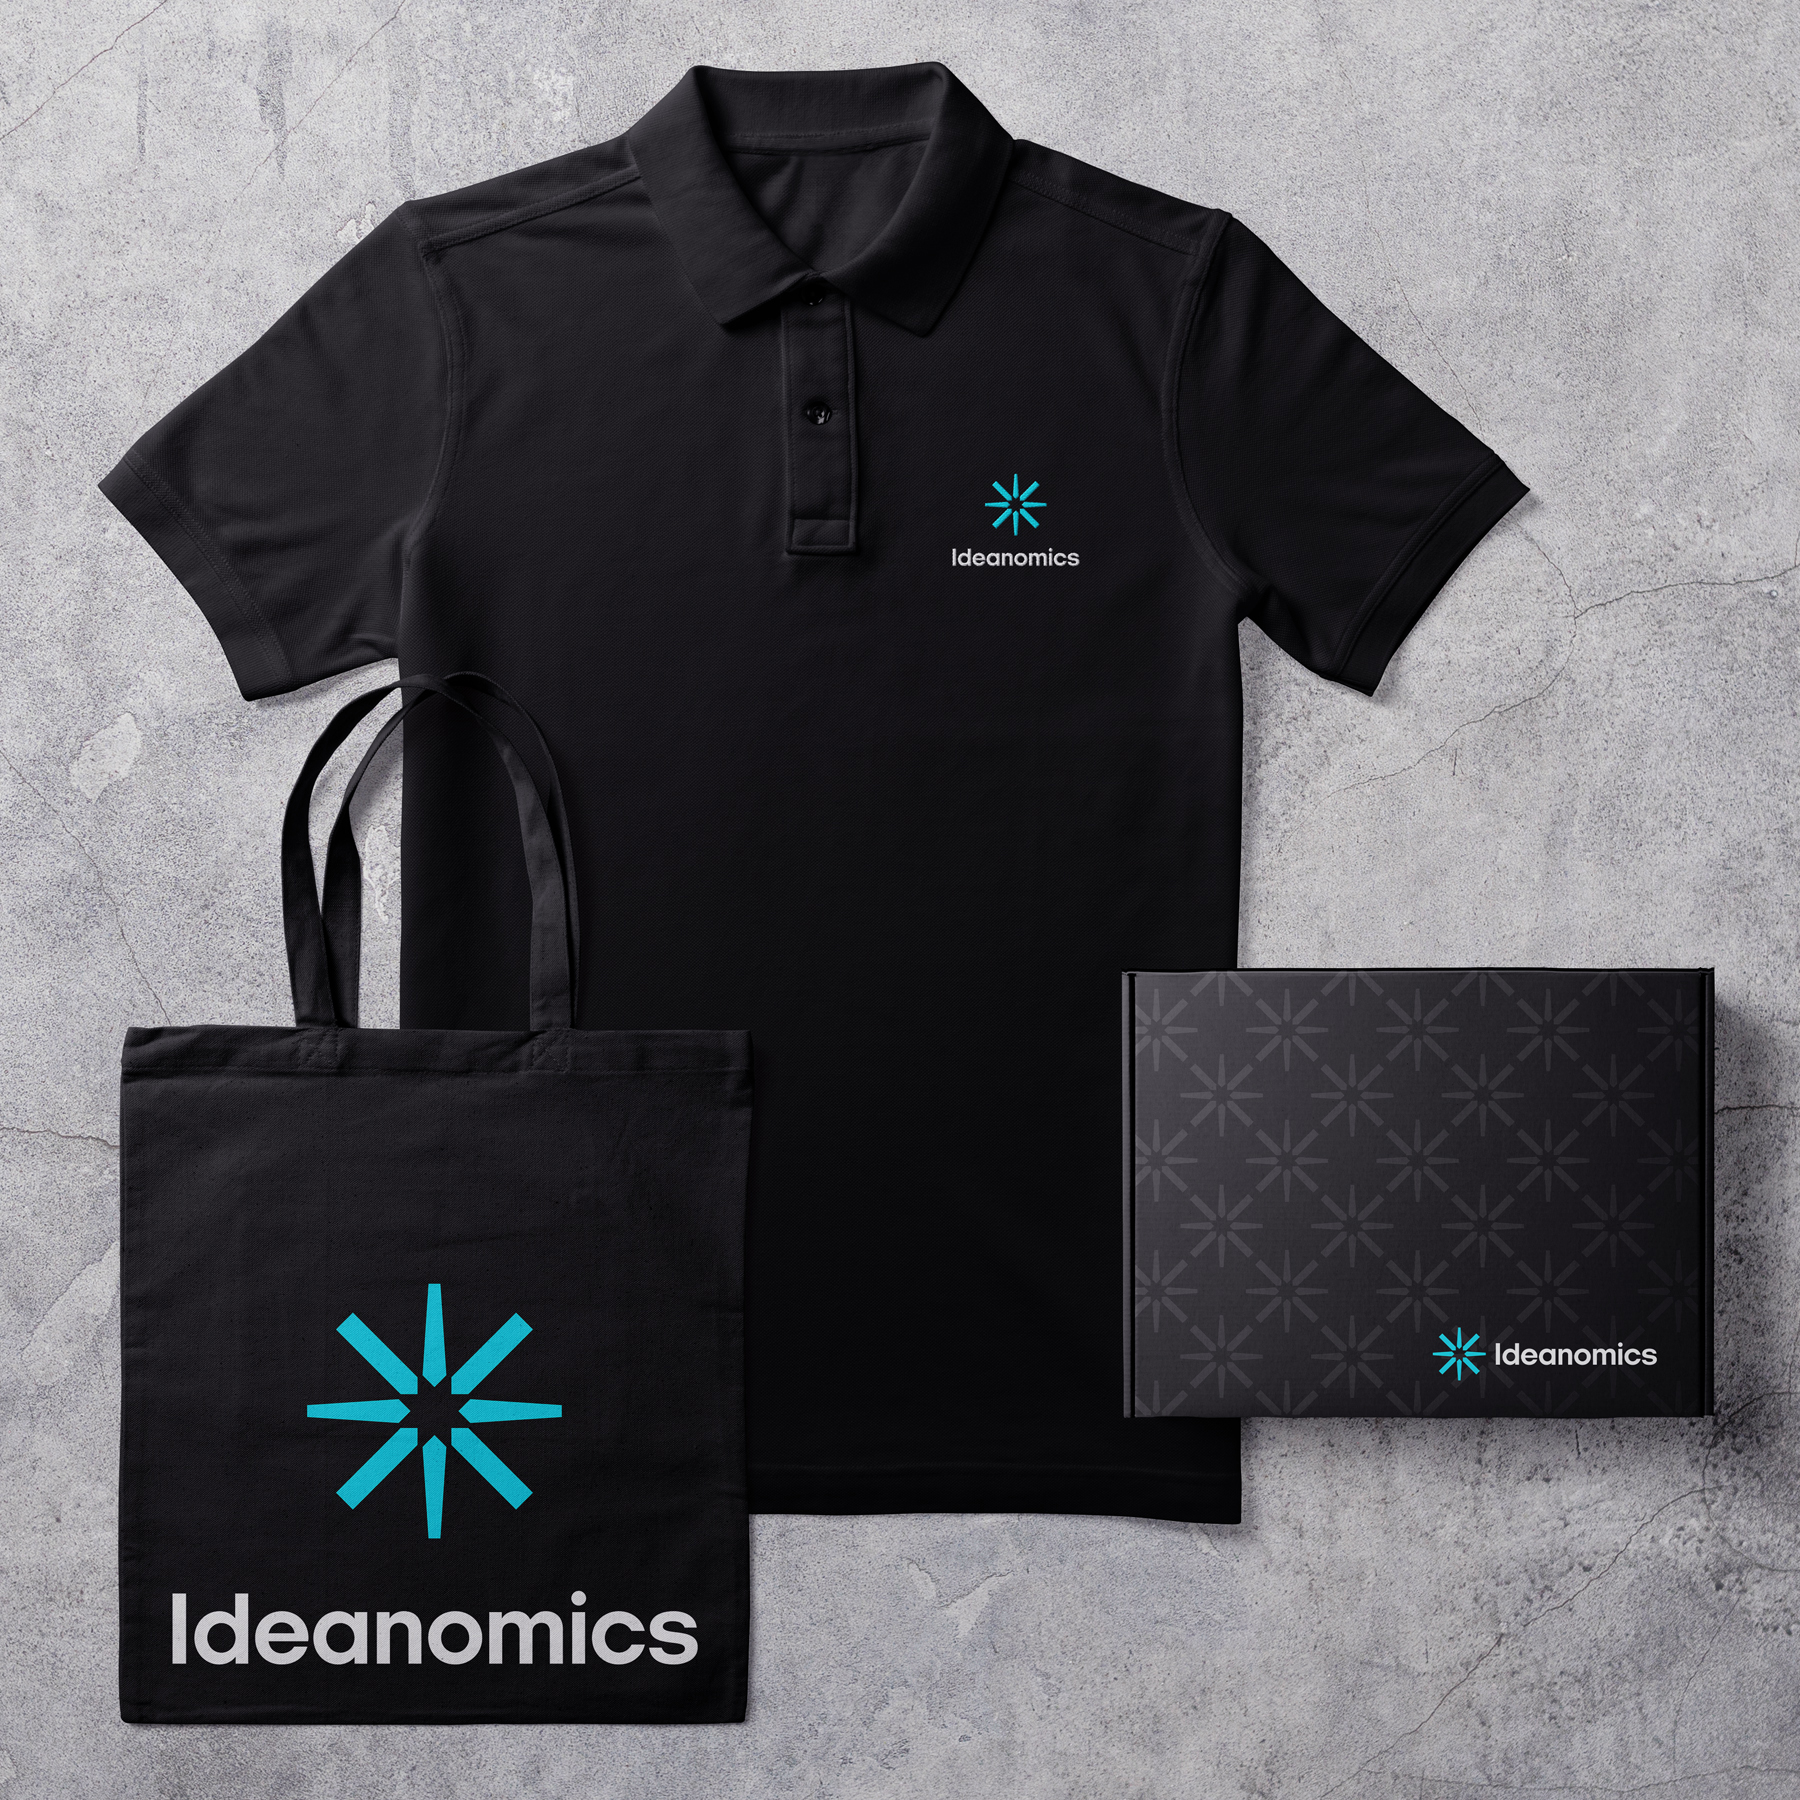 Ideanomics Electric Vehicles and Electric Vehicle Charging, Branding, Logo Design, Creative Director, Art Direction, Graphic Design